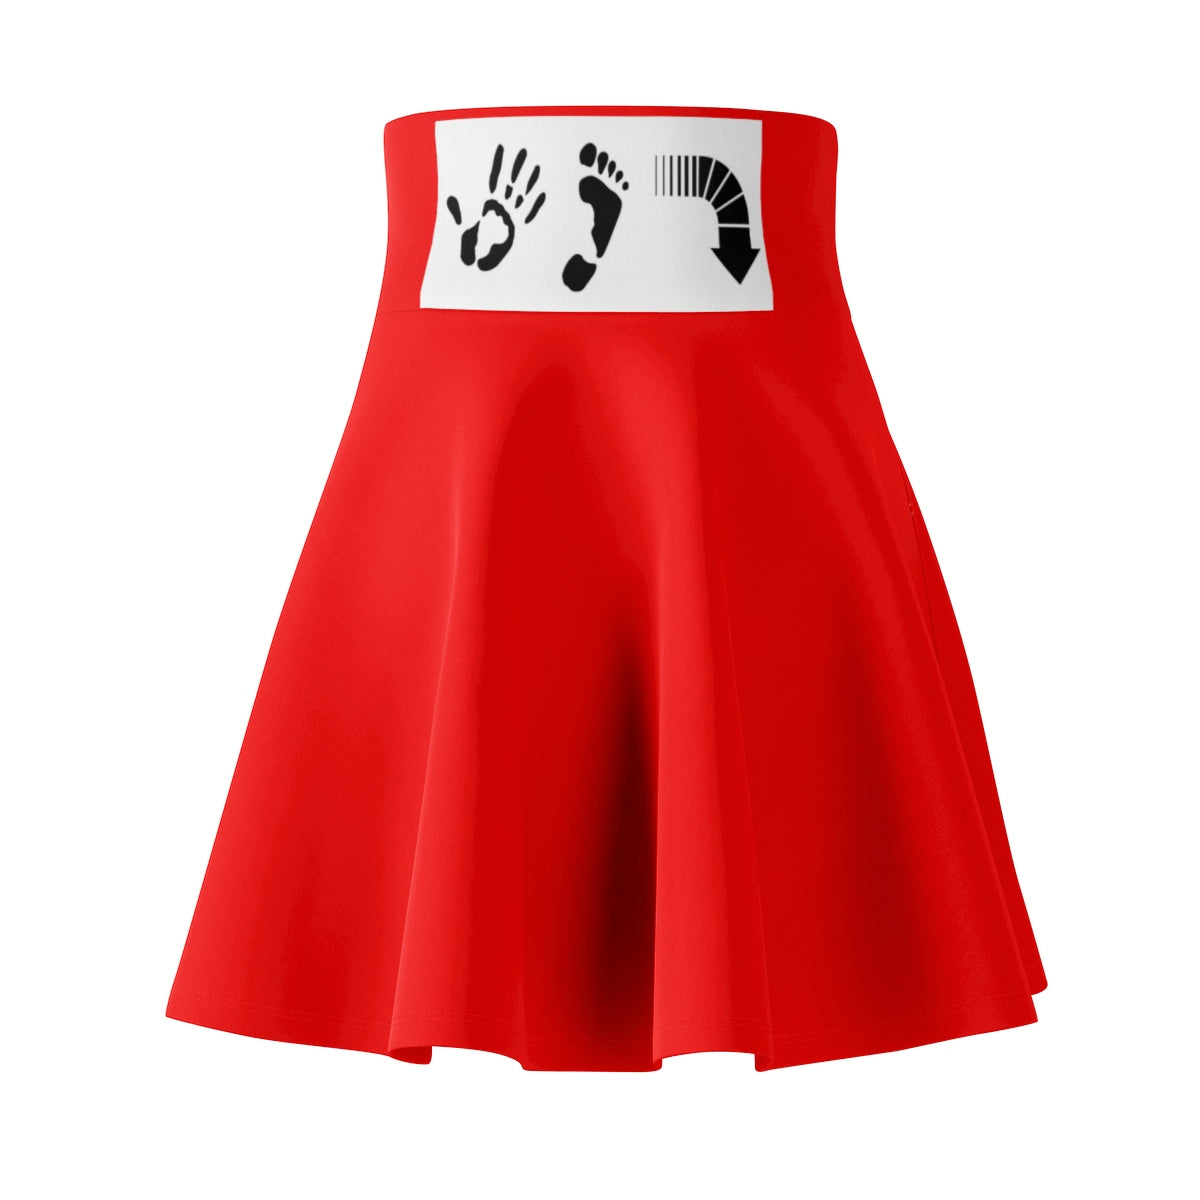 Five Toes Down Red Women's Skater Skirt